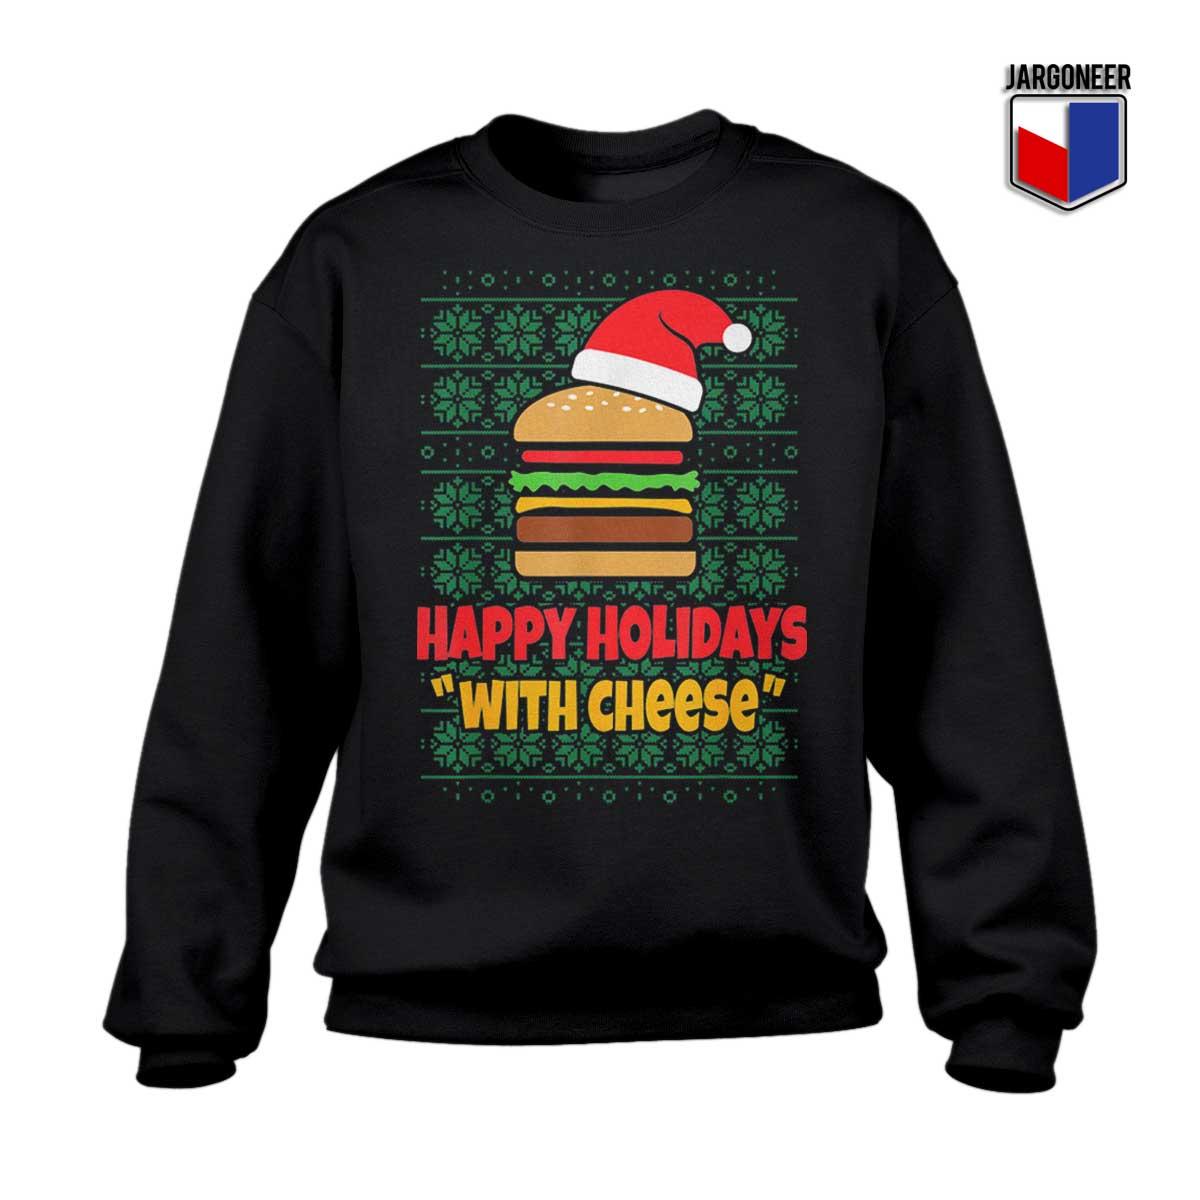 Happy Holidays With Cheese Christmas Sweatshirt - Shop Unique Graphic Cool Shirt Designs